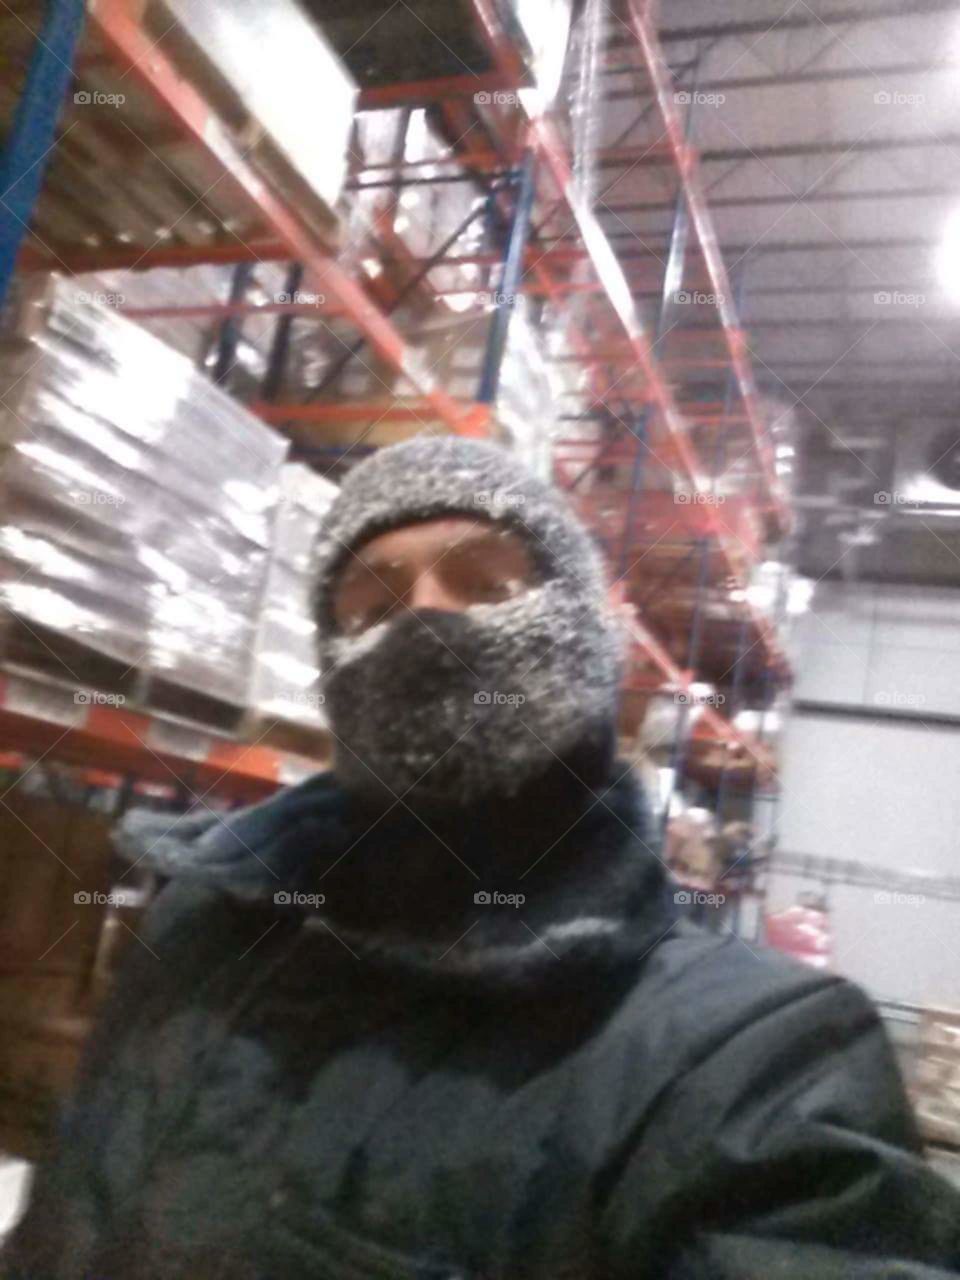 Freezing in the freezer at work!